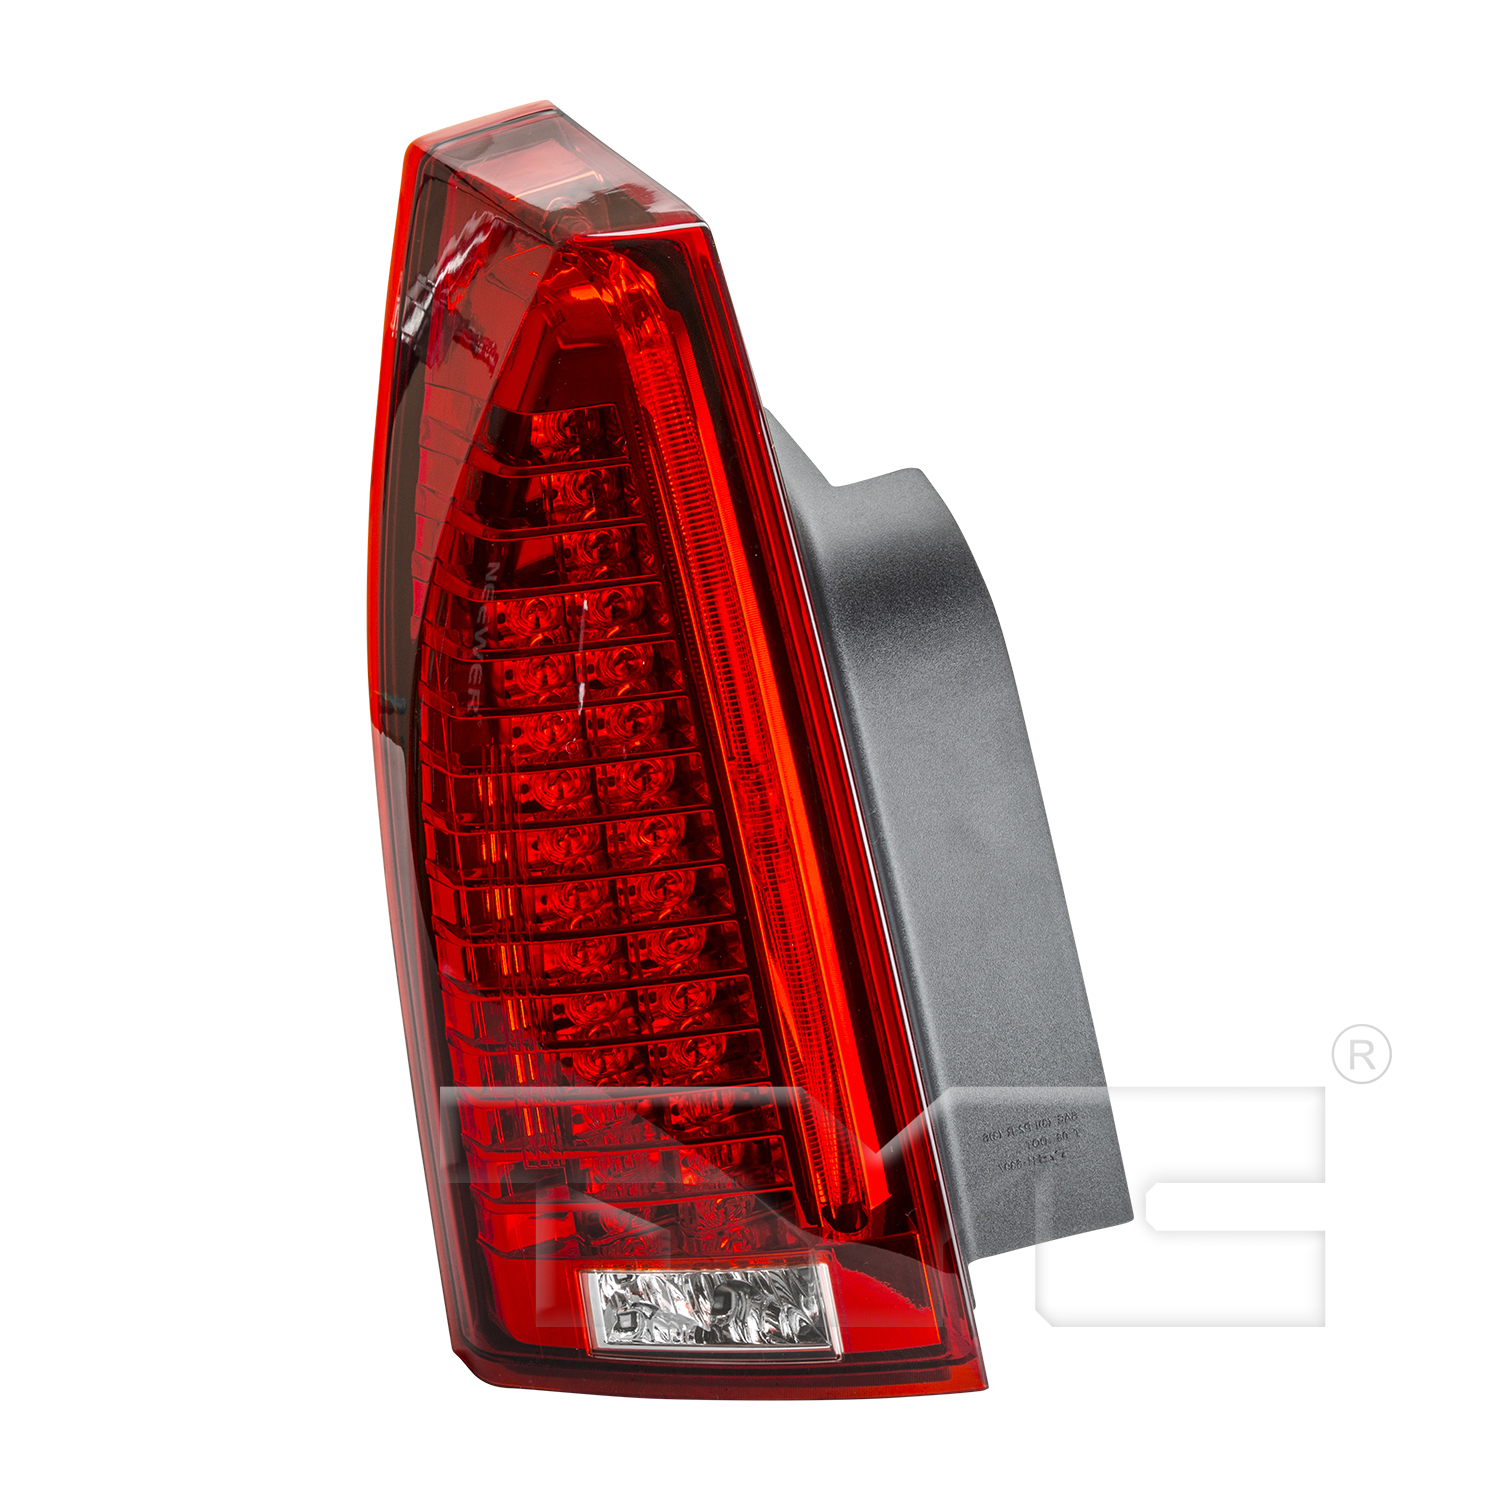 Aftermarket TAILLIGHTS for CADILLAC - CTS, CTS,08-13,LT Taillamp assy